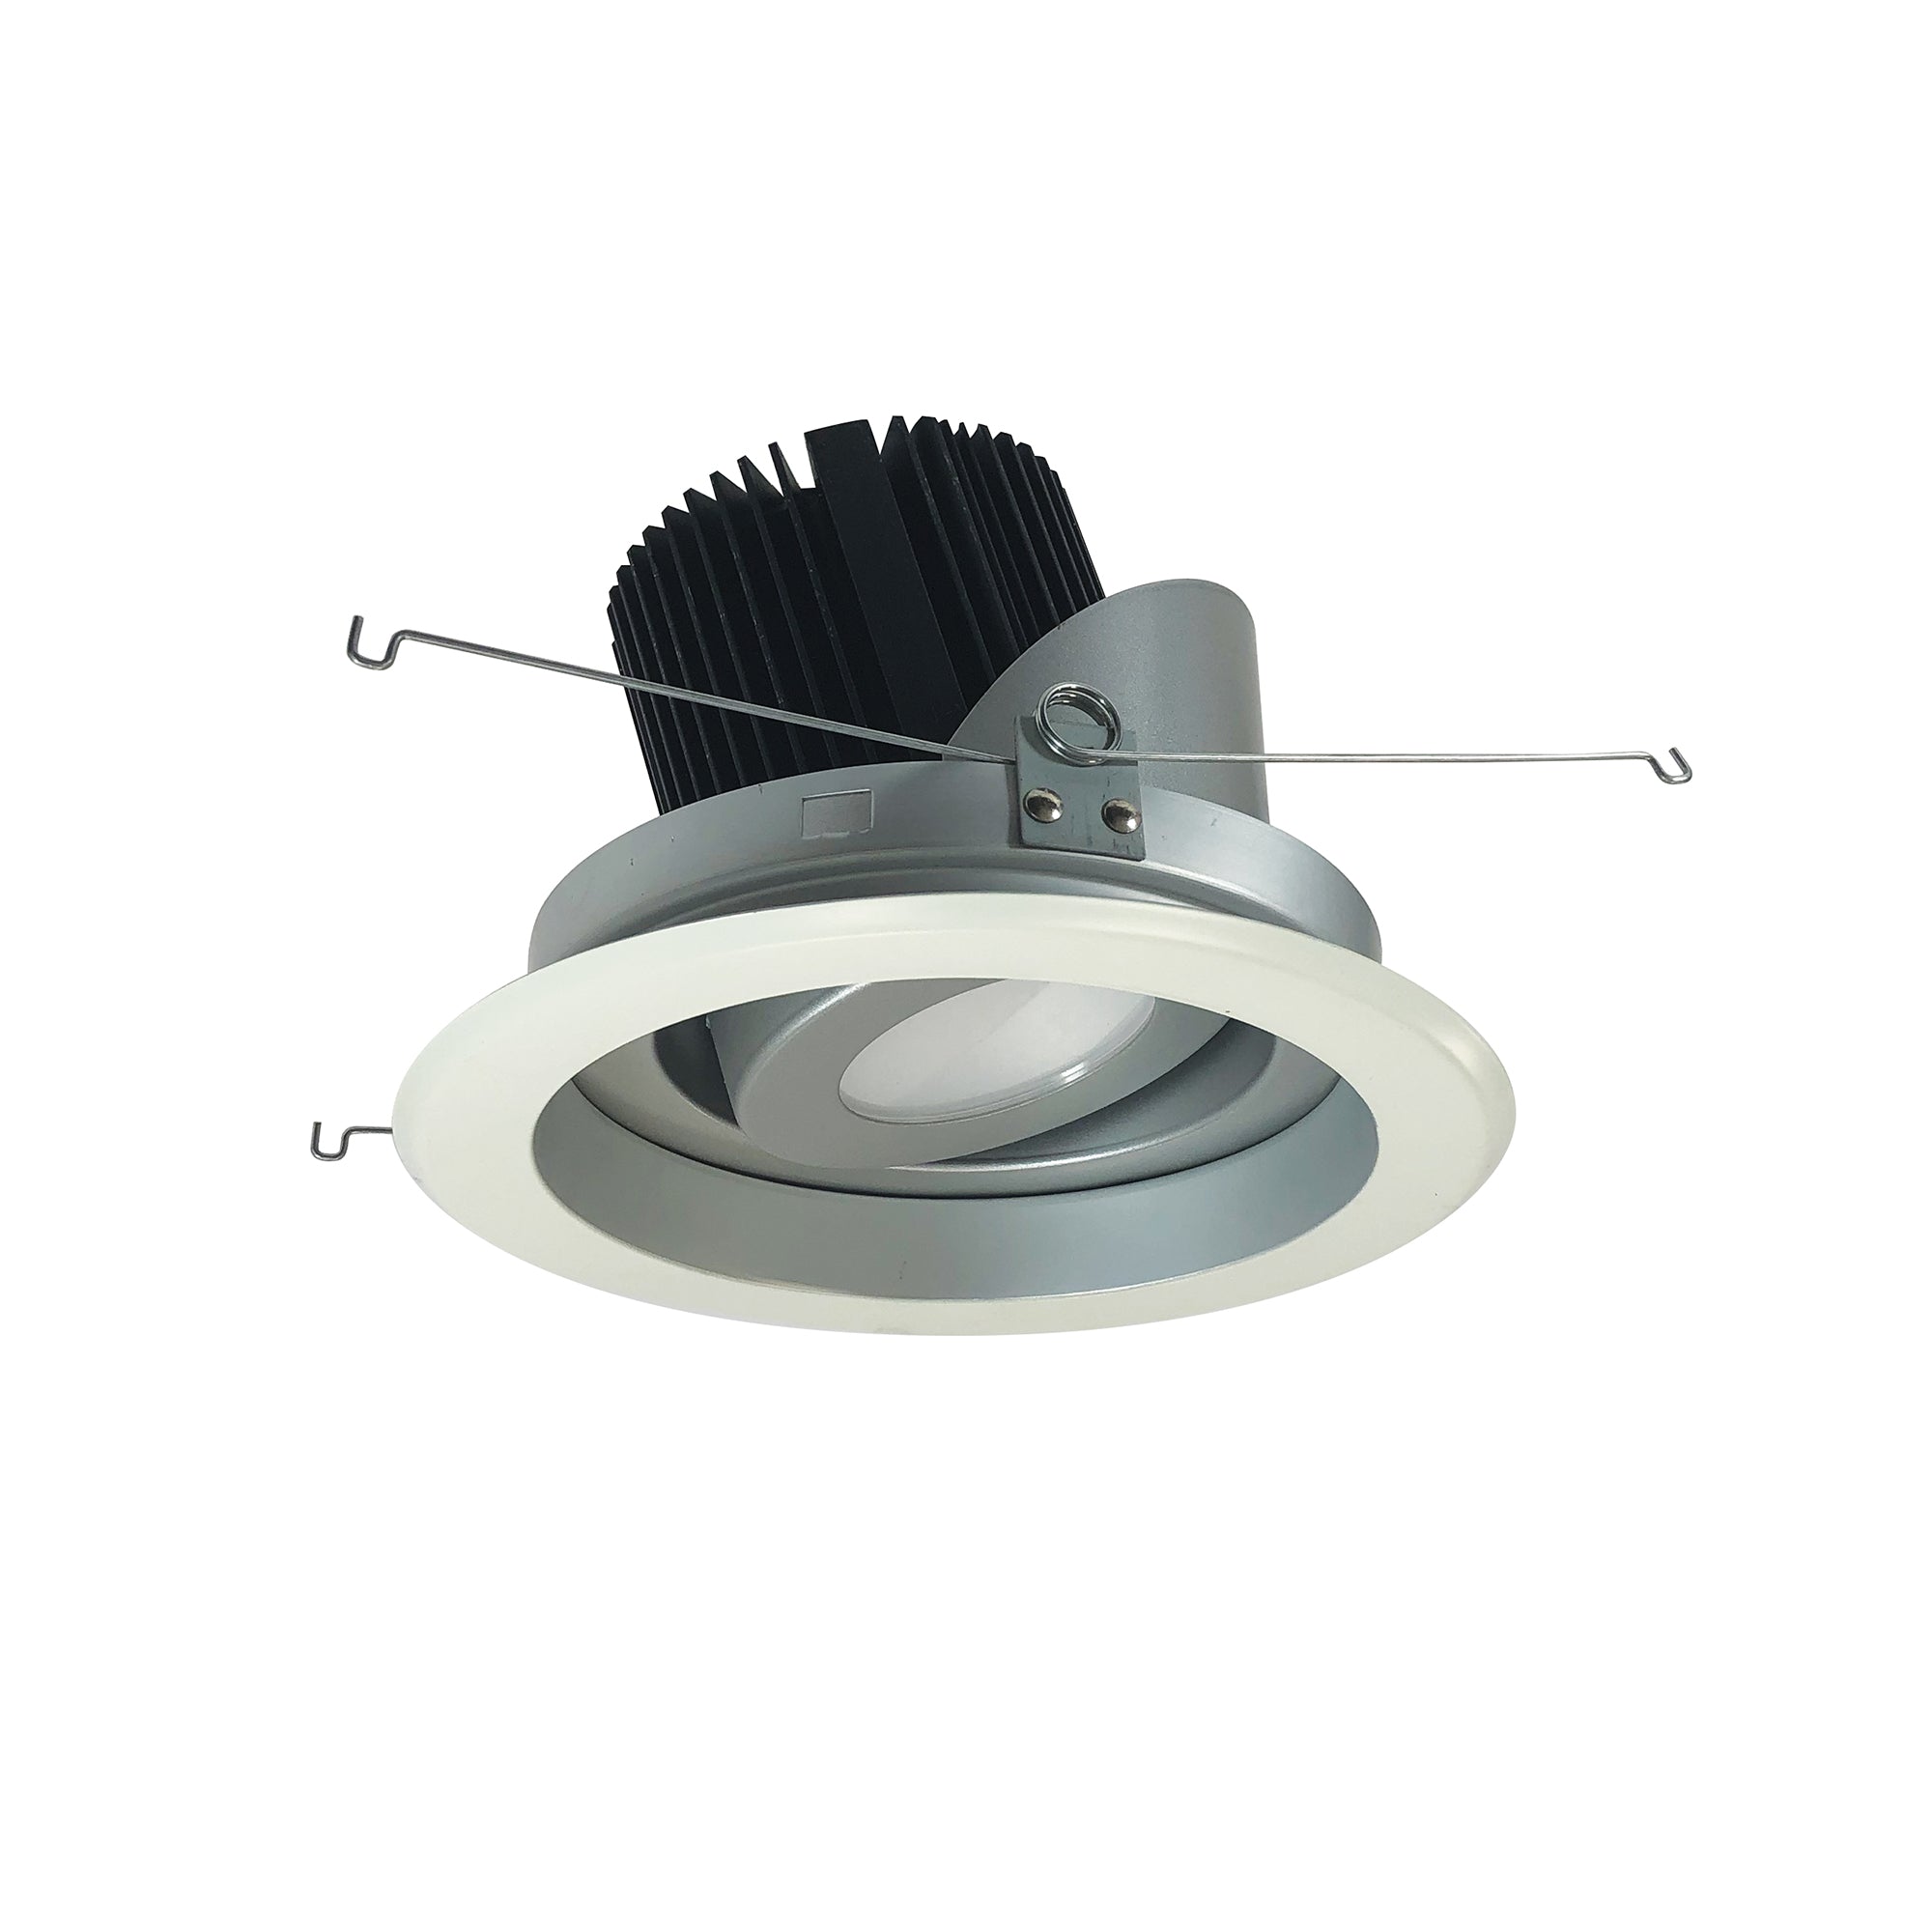 Nora Lighting NRM2-619L2527SHZW - Recessed - 6 Inch Marquise II Round Regressed Adj. Reflector, Spot, 2500lm, 2700K, Haze/White (Not Compatible with NHRM2-625 Housings)